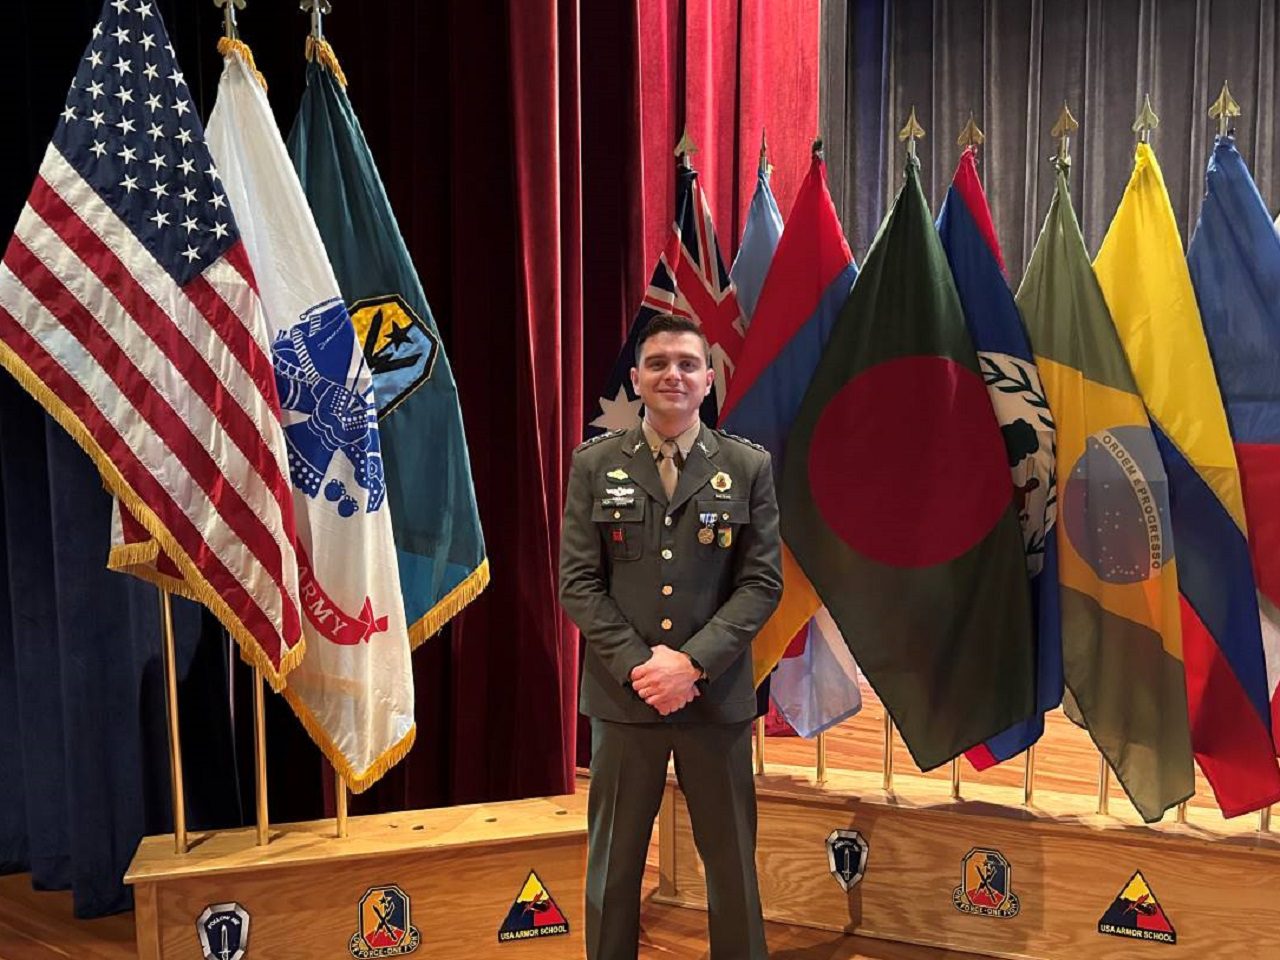 Brazilian Captain stands out in U.S. Army maneuver course